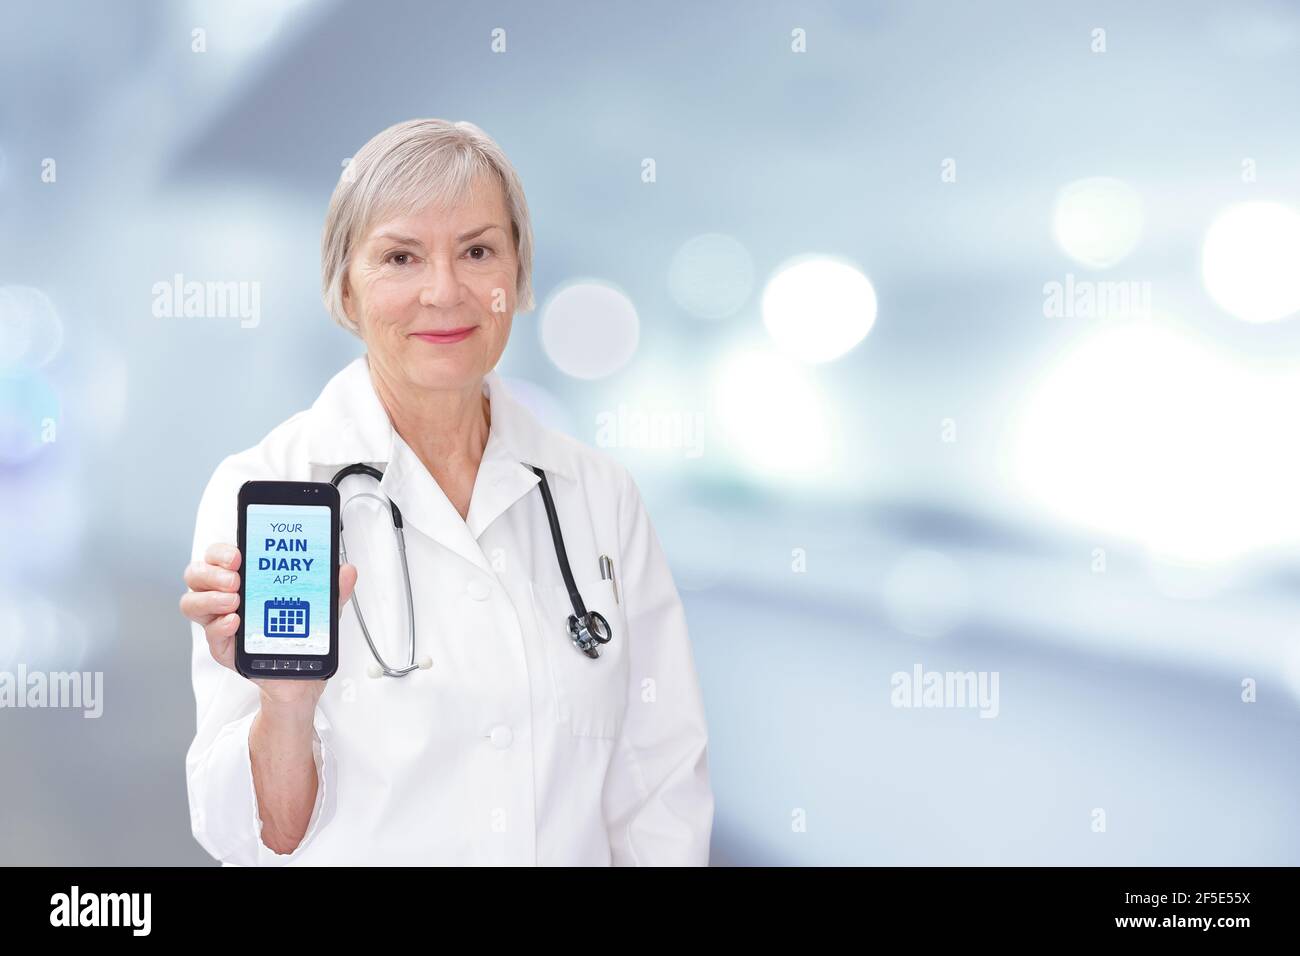 Friendly senior doctor showing a mobile or cell phone with a pain diary app. Stock Photo